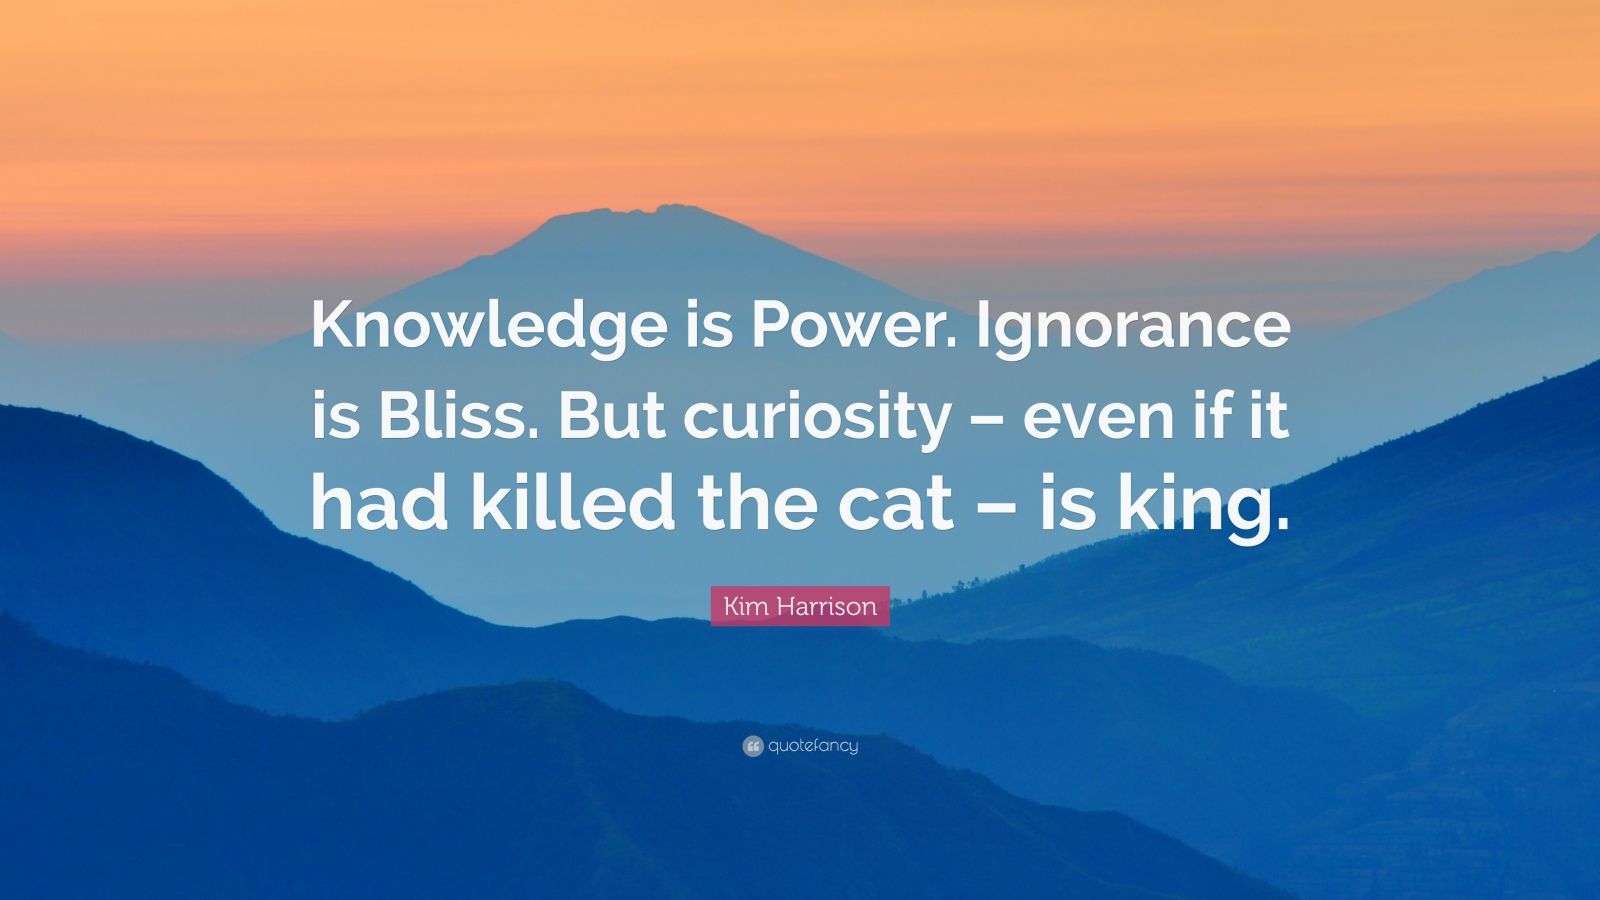 Kim Harrison Quote: “Knowledge is Power. Ignorance is Bliss. But